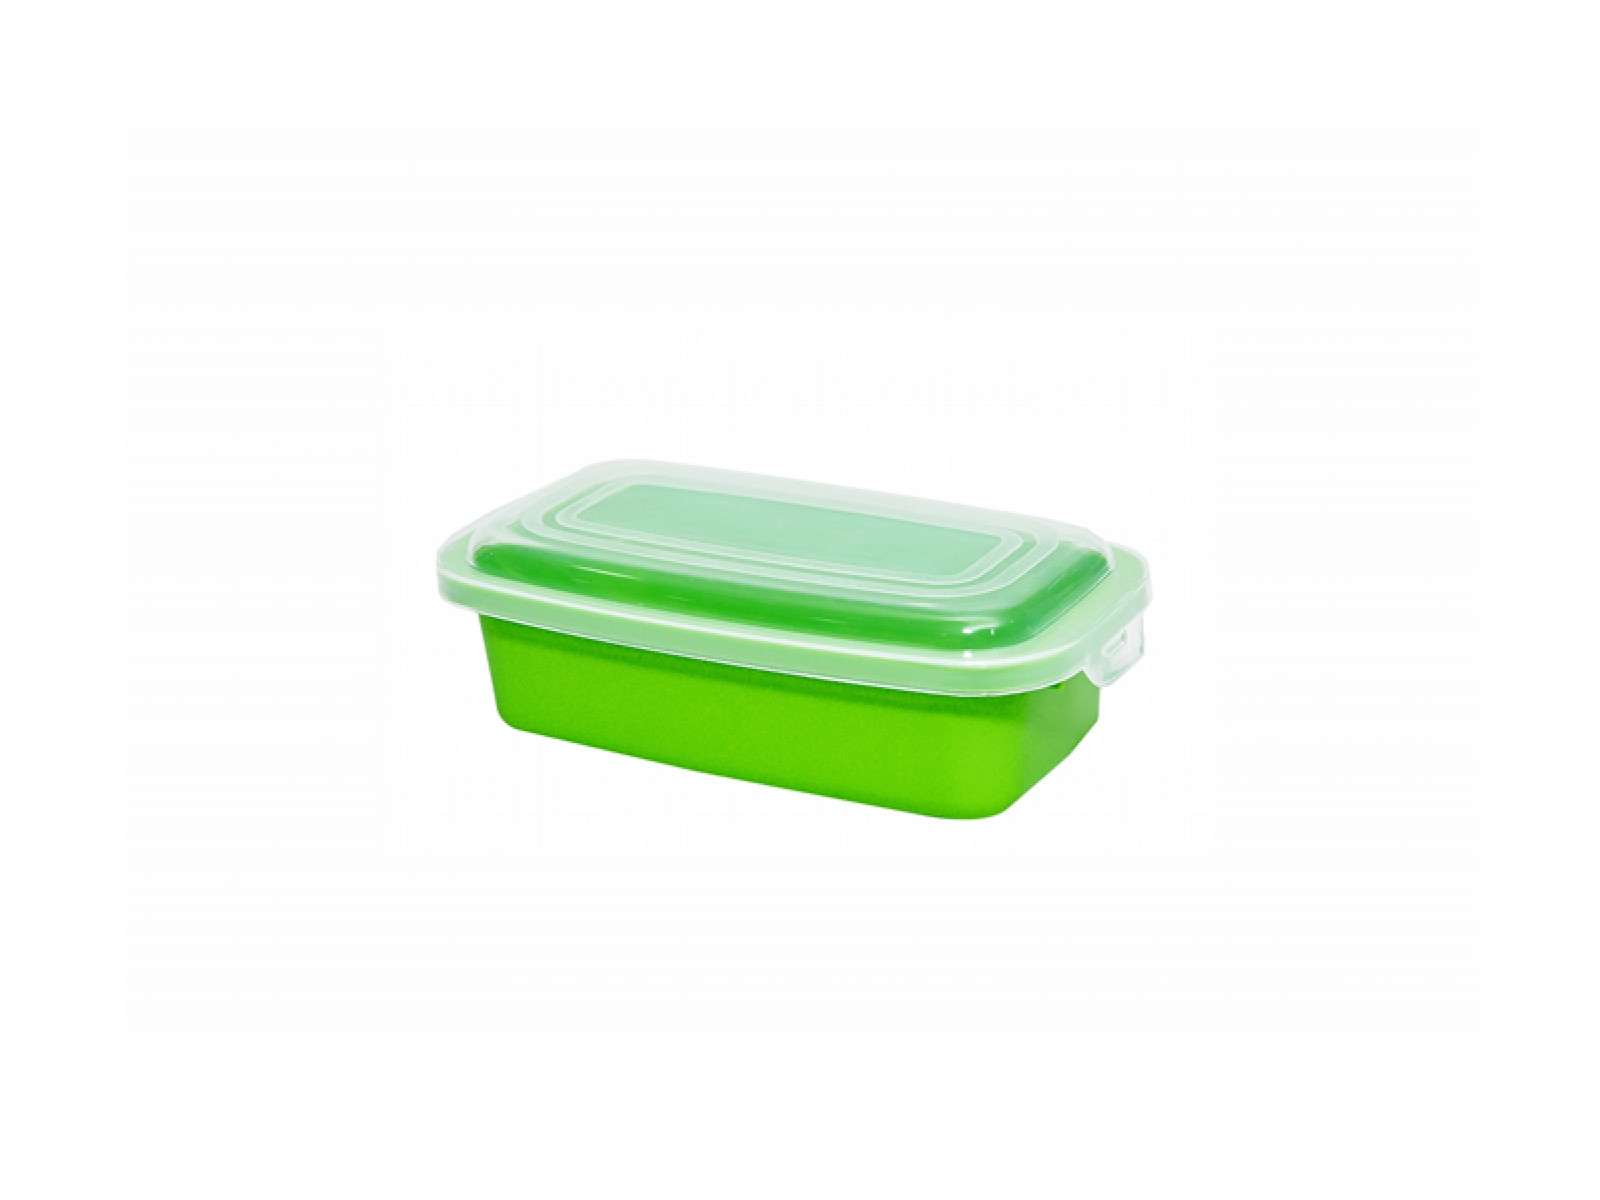 Rounded rectangular container K serries - Small